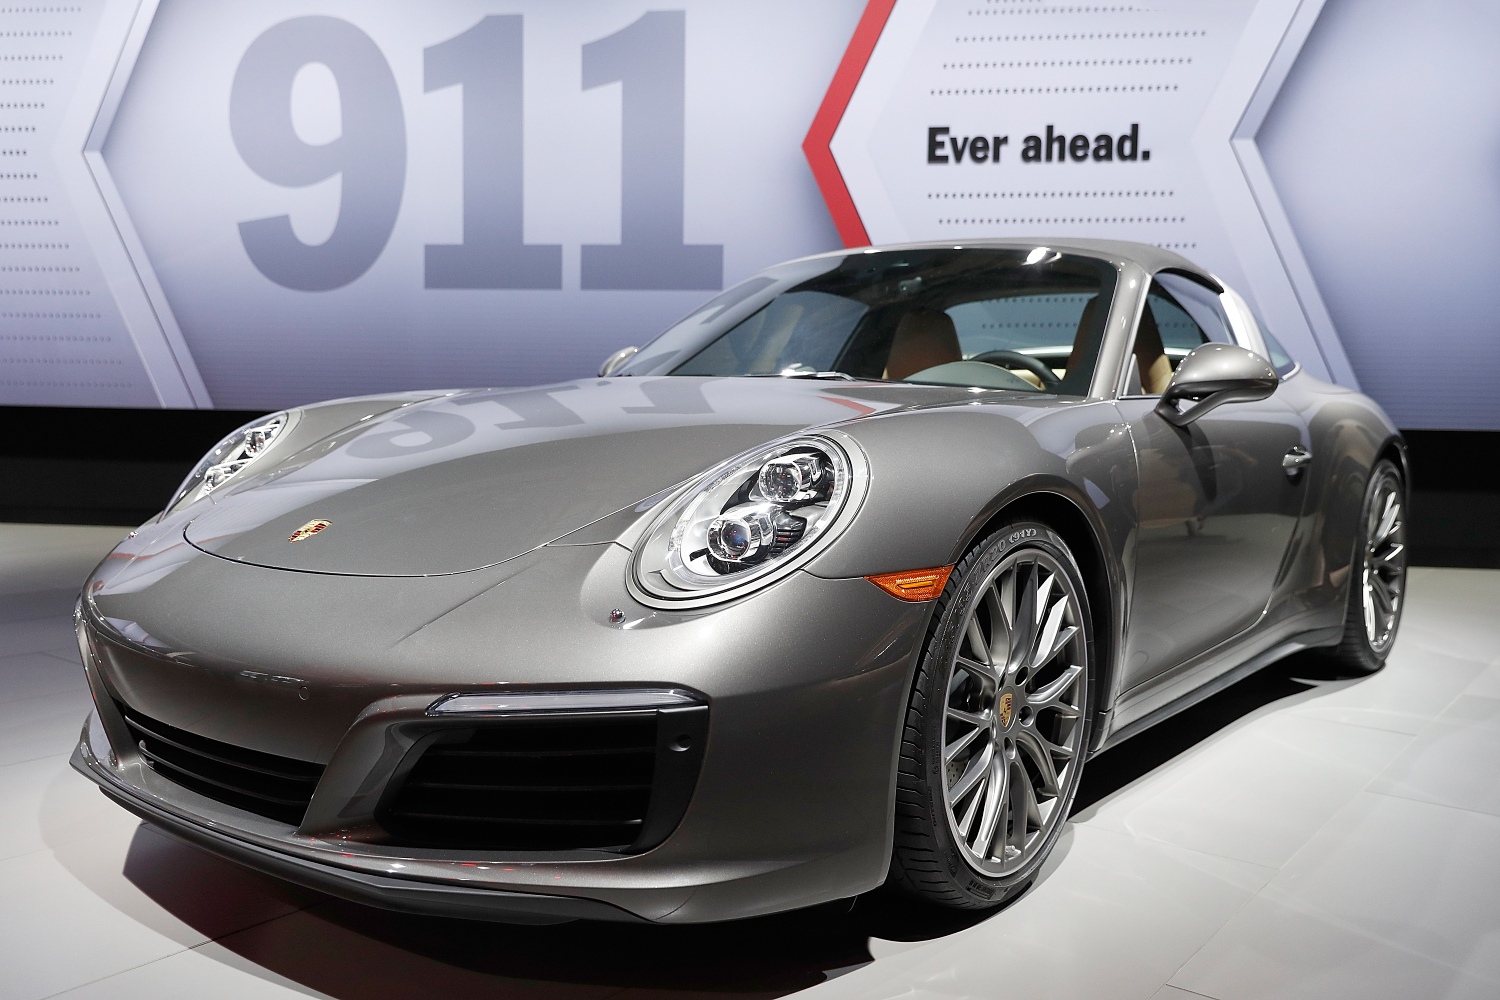 The best luxury coupes and convertibles from 2016 include this Porsche 911